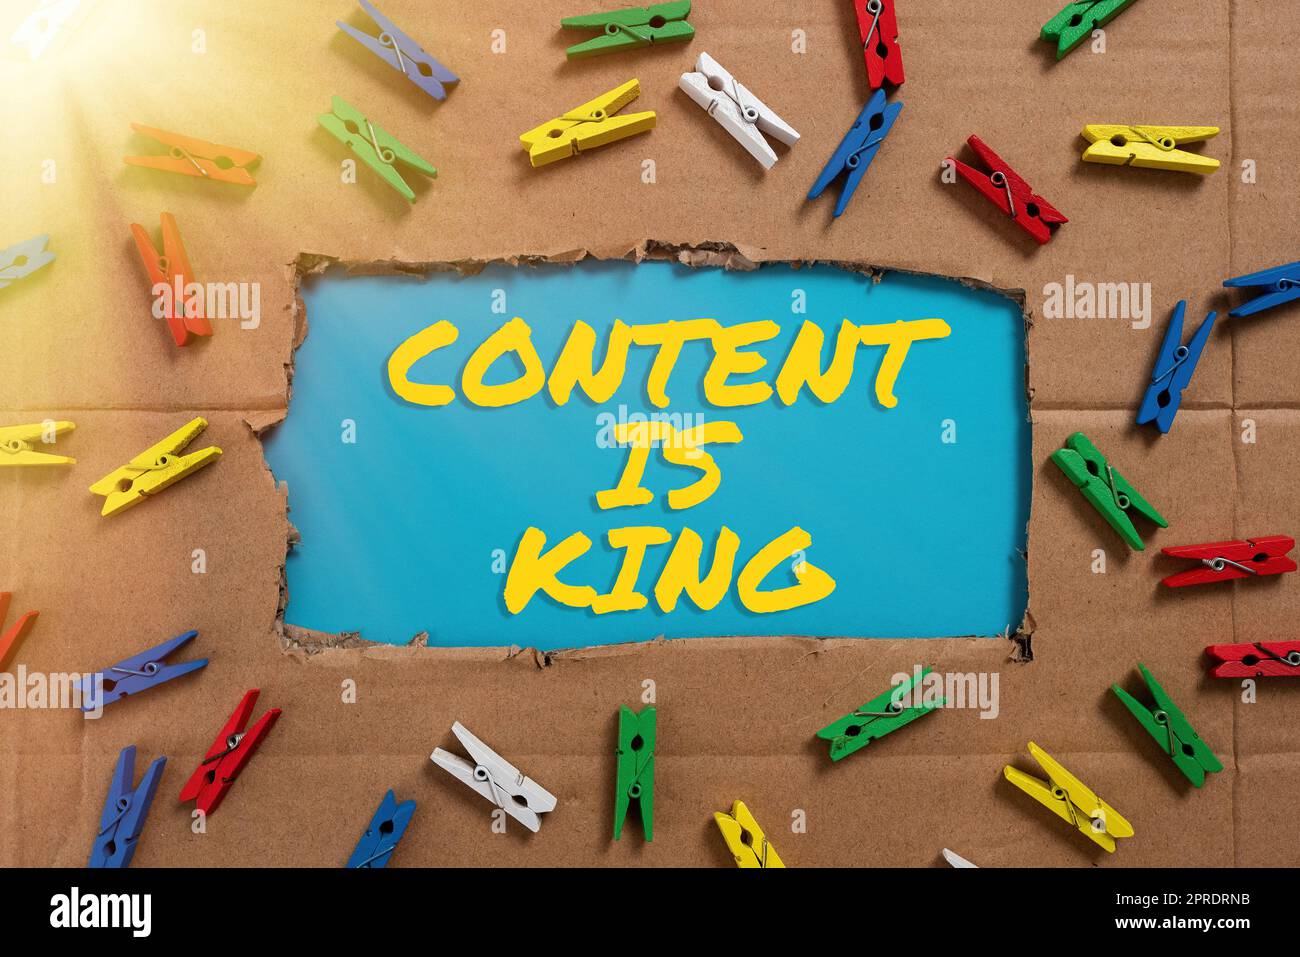 Hand writing sign Content Is King. Business approach Content is the heart of todays marketing strategies Important Ideas Written Under Ripped Cardboard With Colored Pegs Around. Stock Photo